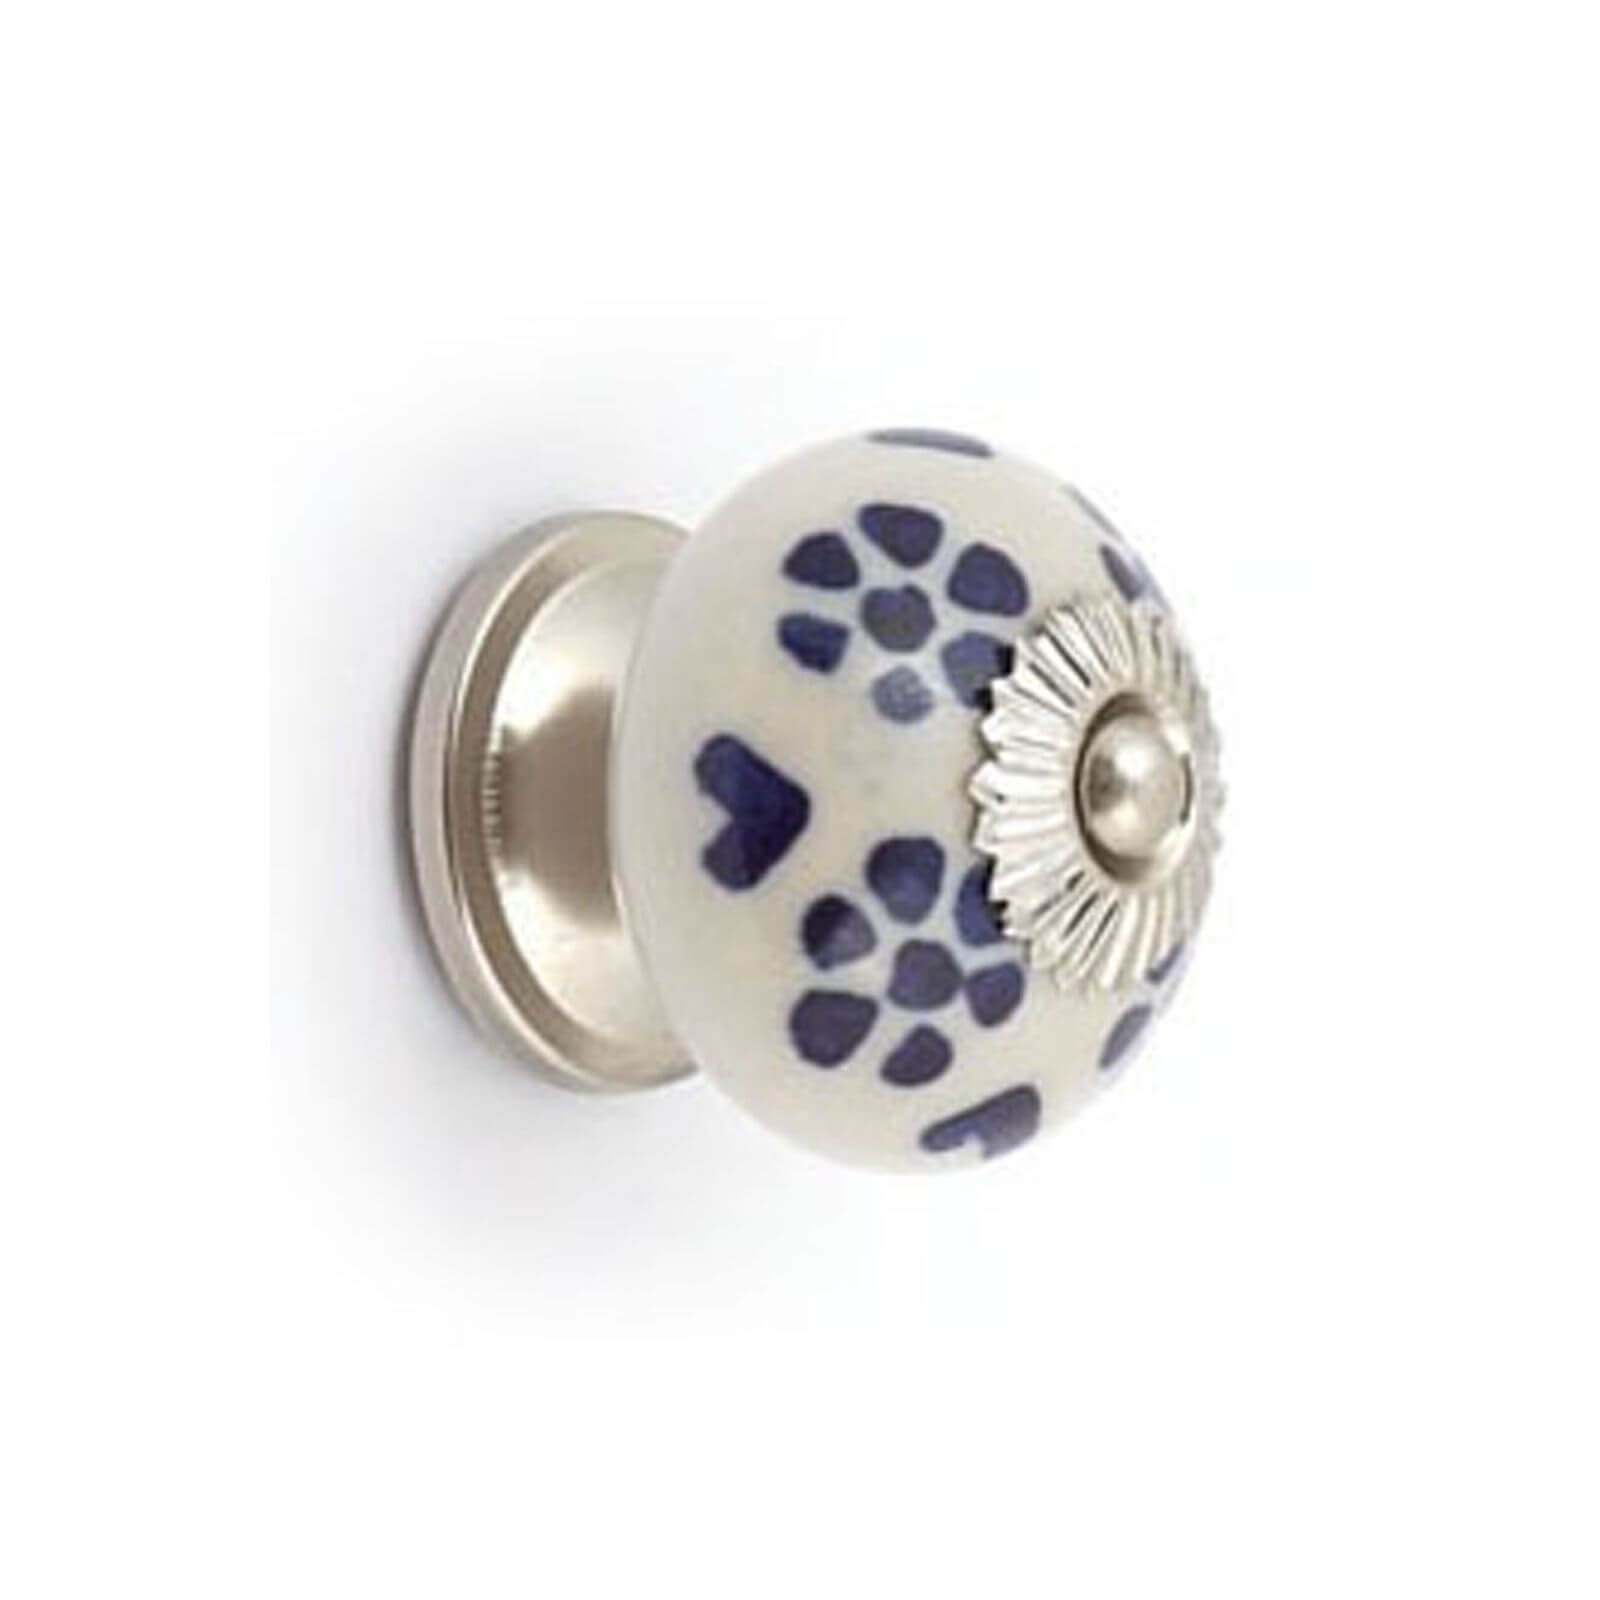 Blue Flower and Silver Effect Ceramic Ball Cabinet Door Knob